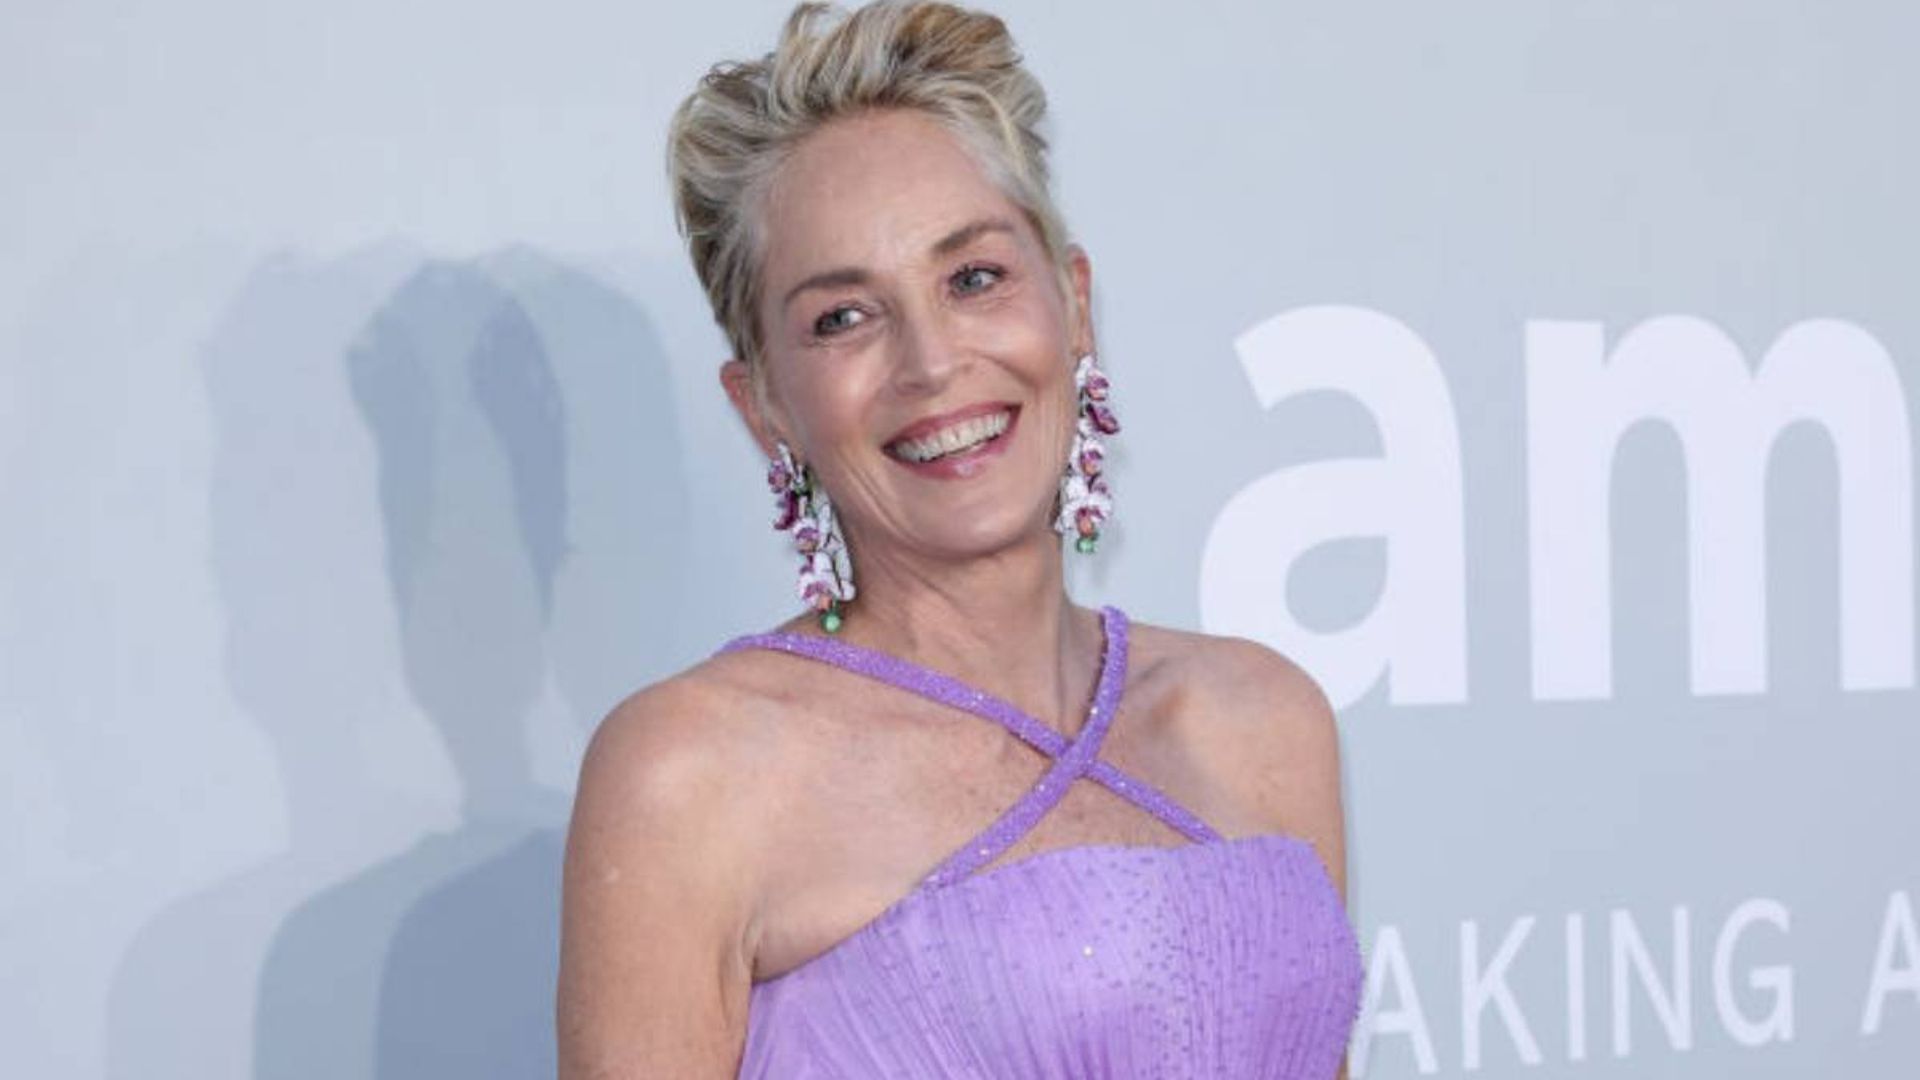 Sharon Stone wows in racy black bra and fans are astonished